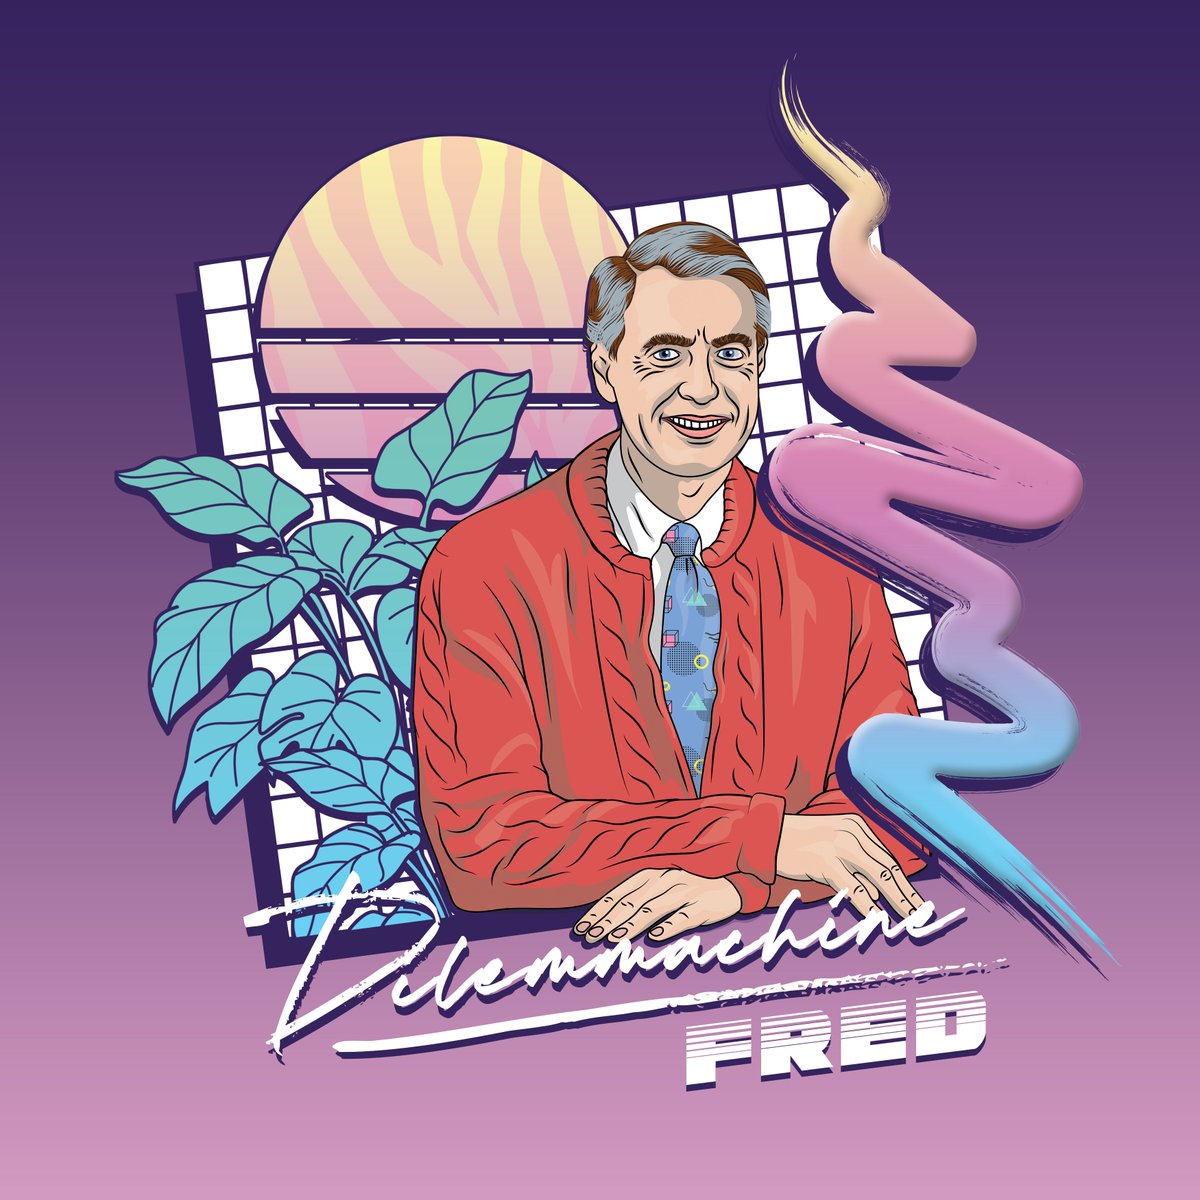 \\ O U T || T O D A Y //
My new single “Fred”
open.spotify.com/track/4wtWED9S…
Stream it on your preferred service or download it free from my soundcloud or bandcamp.
And today, make sure you say to someone “I like you just the way you are”
#drumwave #retrowave #synthwave #drumnbass #DnB